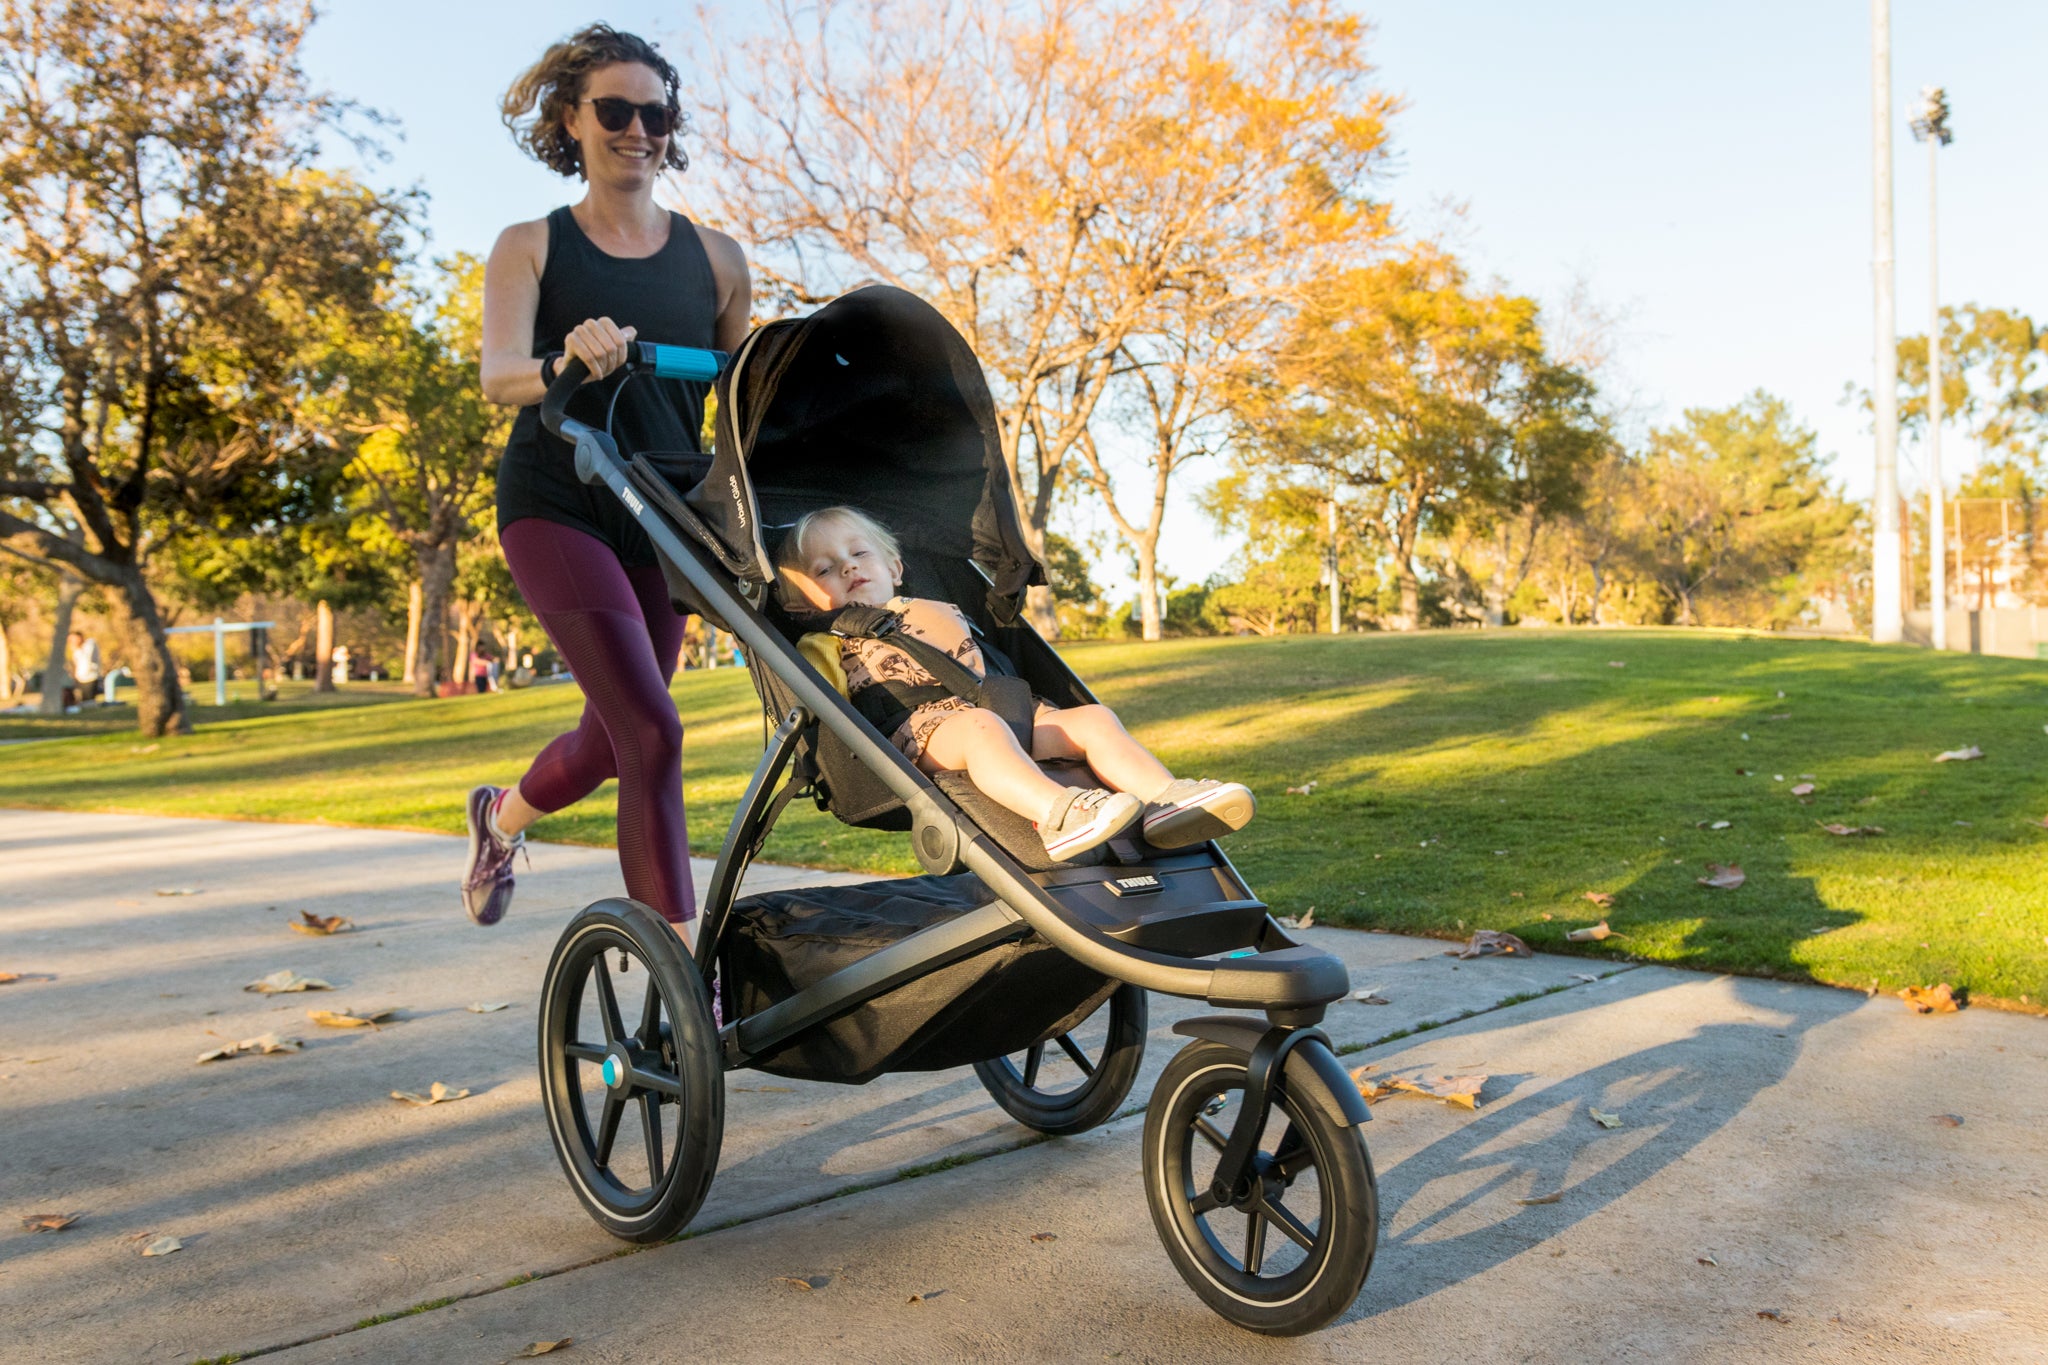 Where To Buy A Jogging Stroller